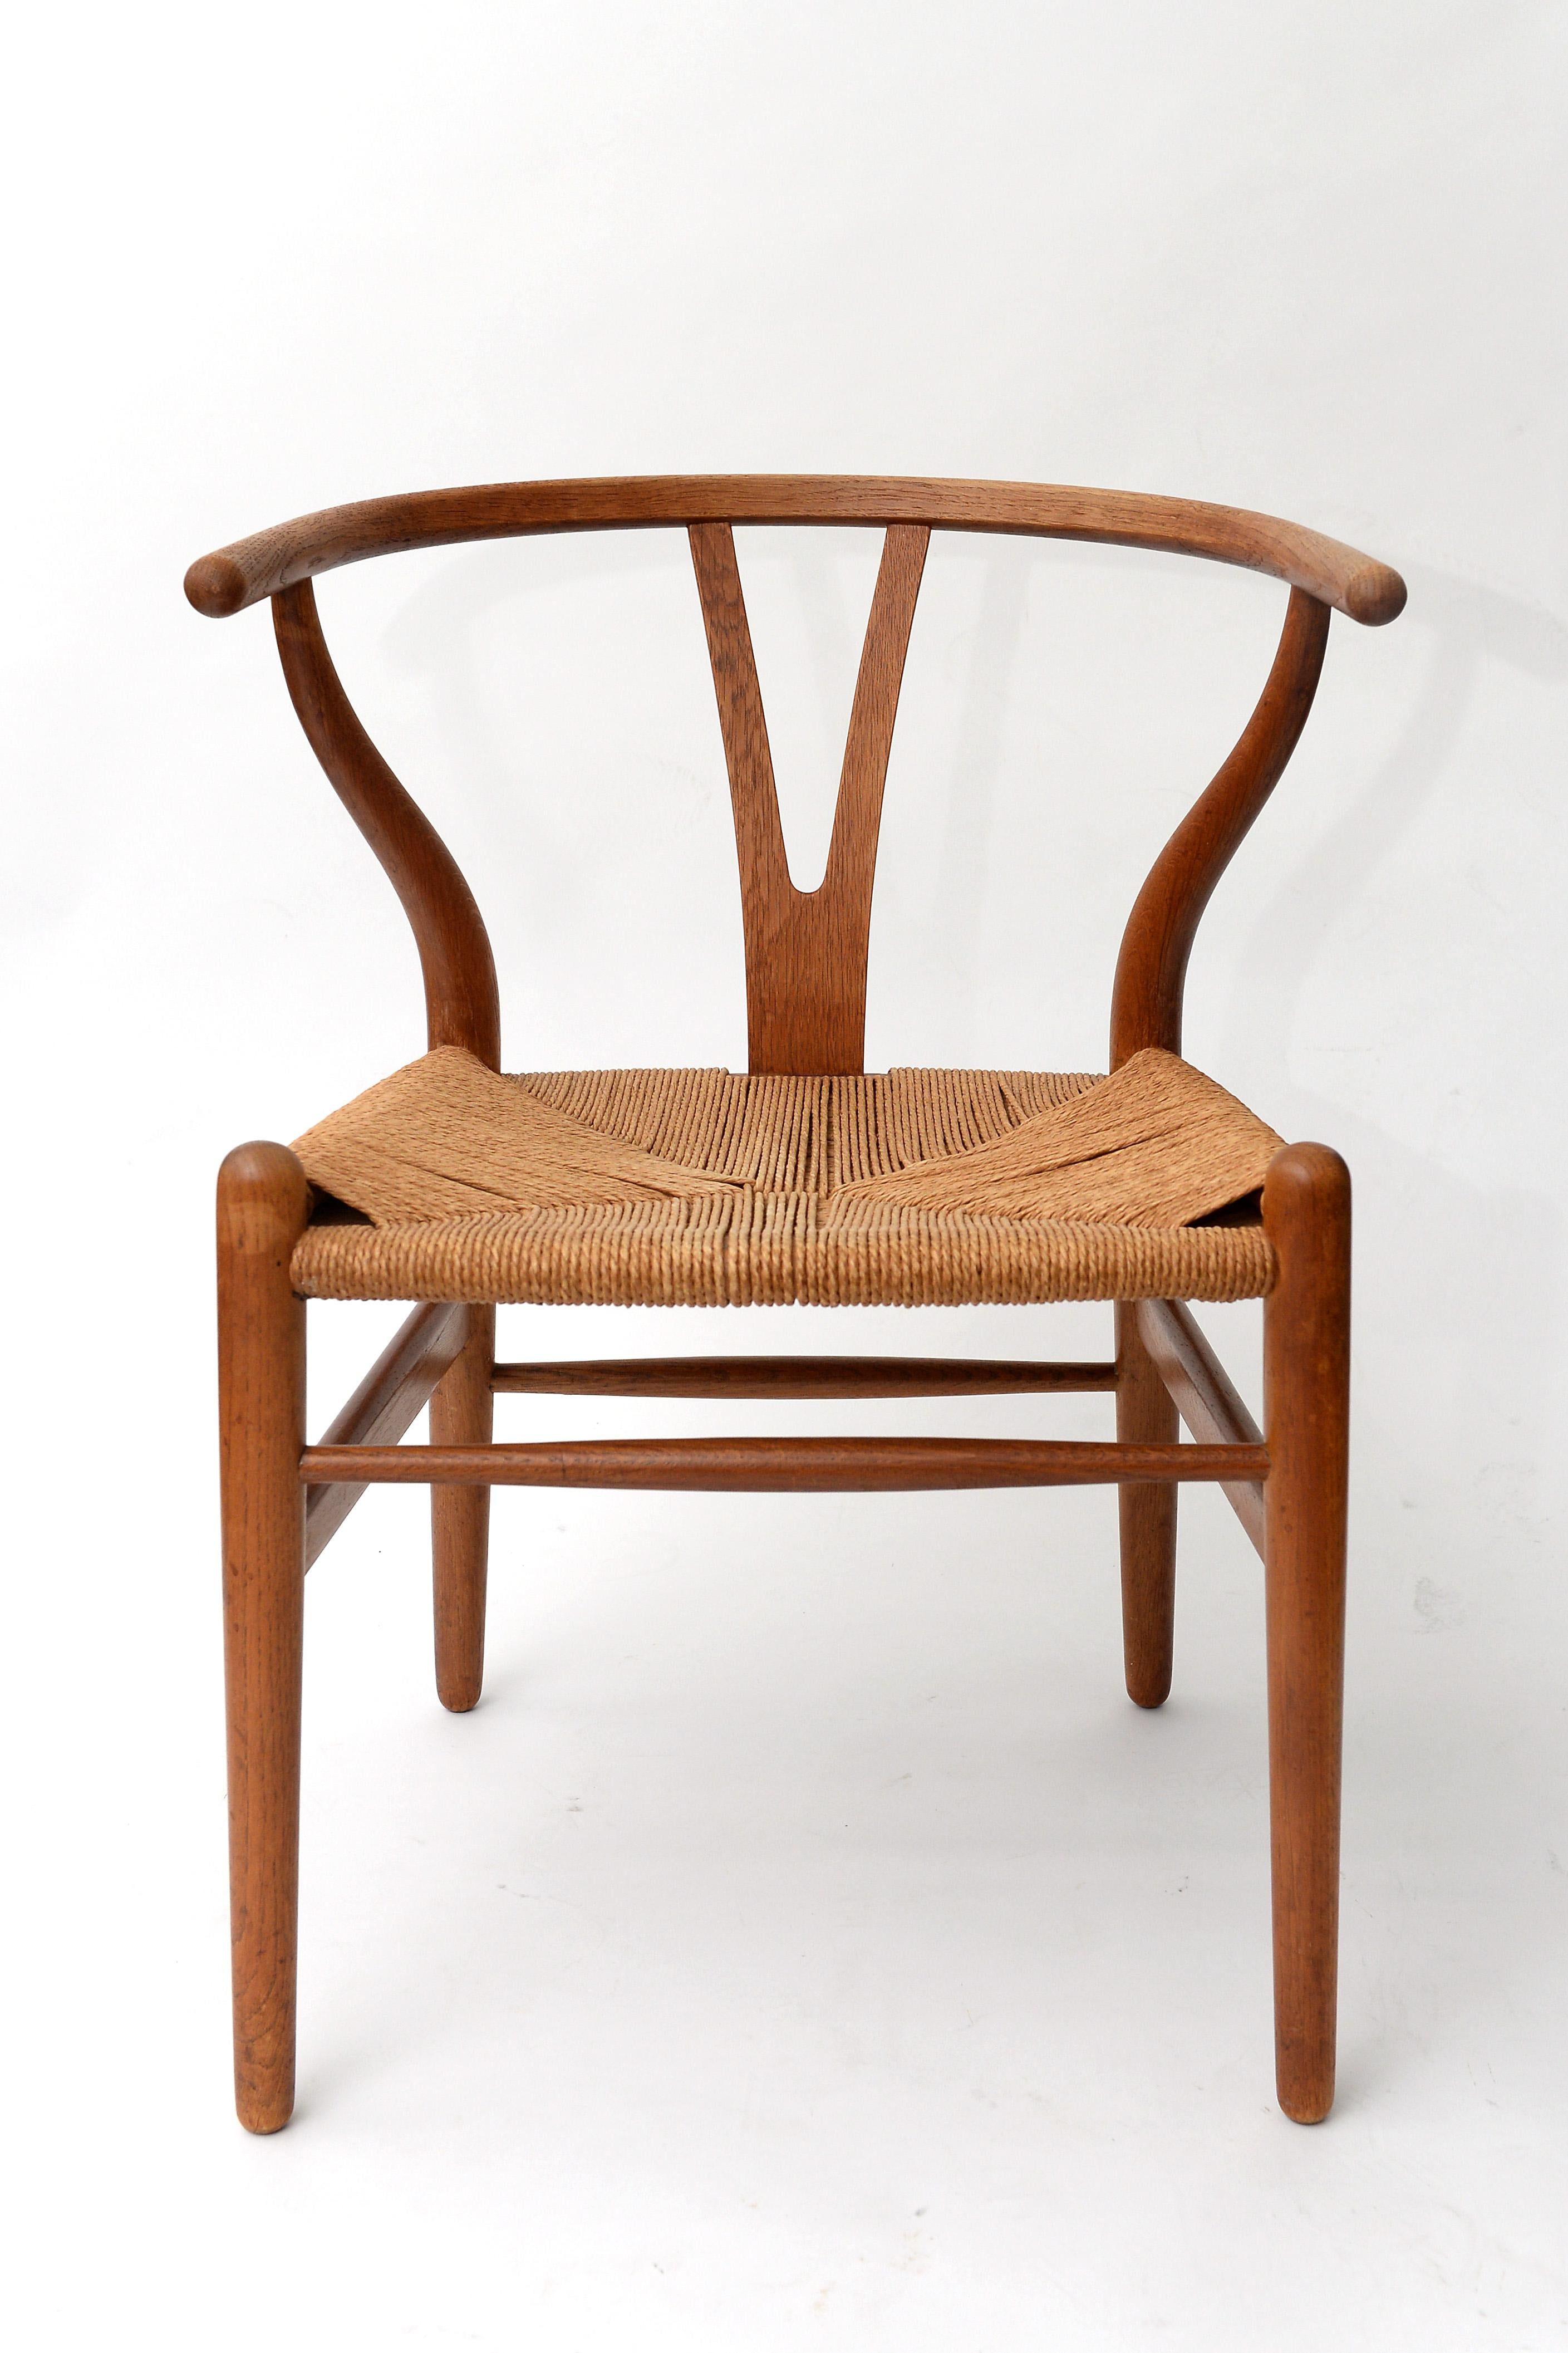 Beautiful set containing a Mid-Century Modern wishbone chair by Hans Wegner for Carl Hansen & Søn and a Jorgen Baekmark stool.

The two pieces have a similar design and are made of the same materials. They maych perfectly and create a fine looking